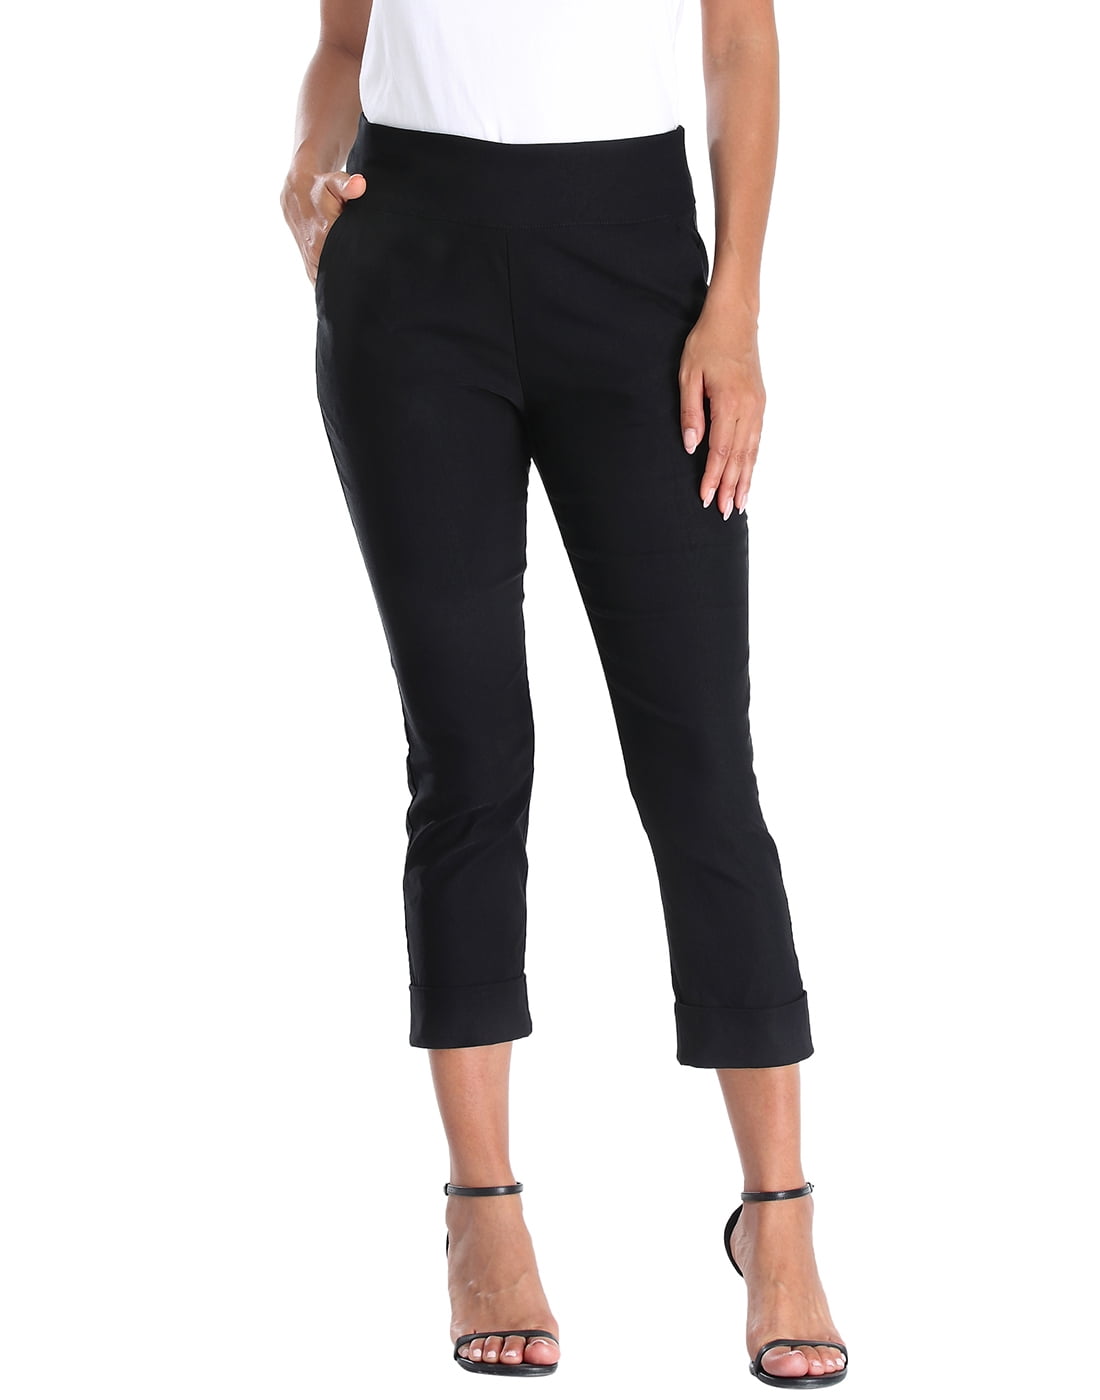 HDE Pull On Capri Pants For Women with Pockets Elastic Waist Cropped ...